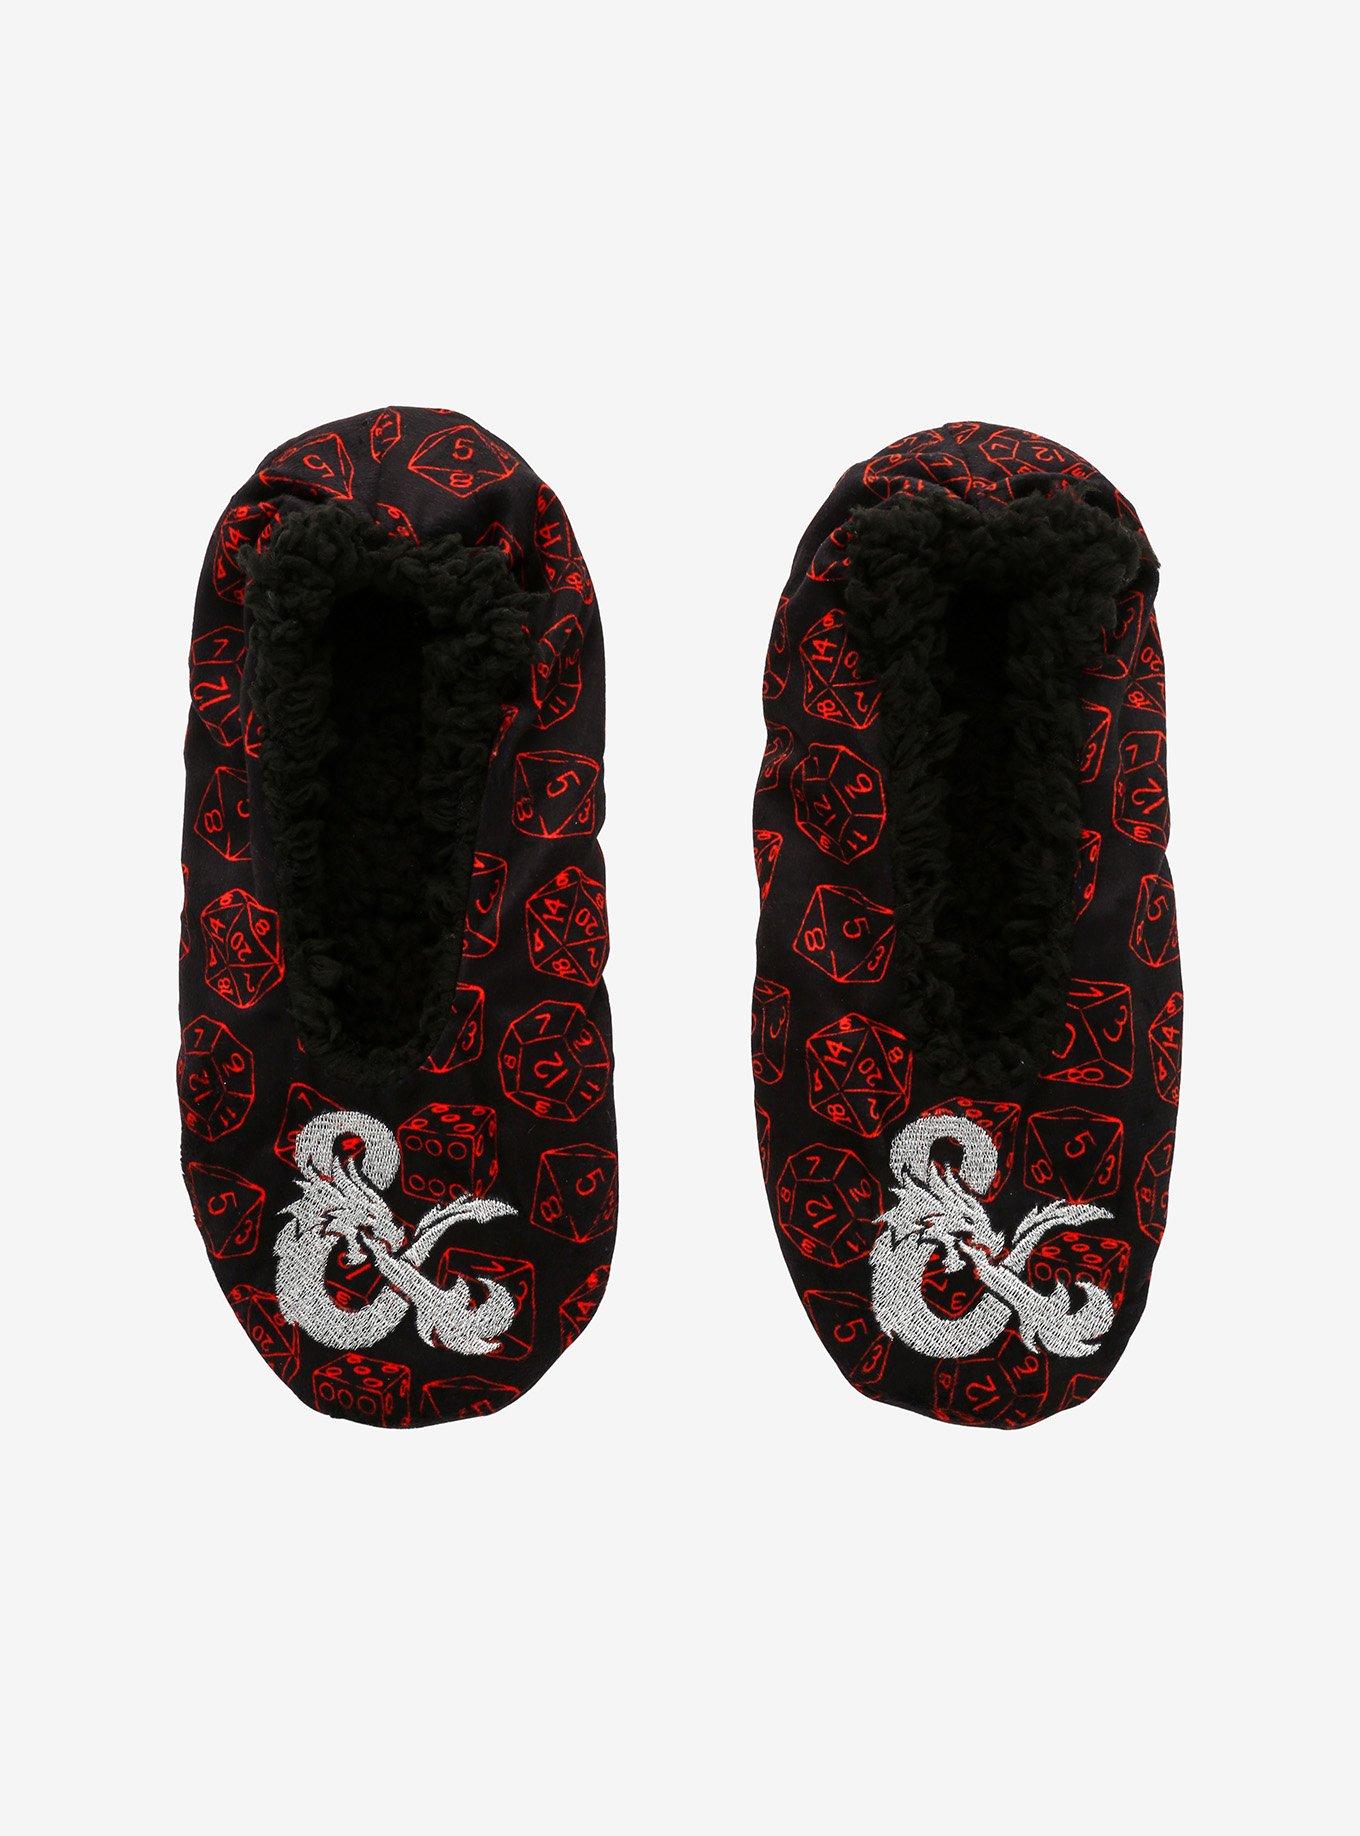 Dungeons & Dragons Dice Cozy Slippers, BLACK, alternate